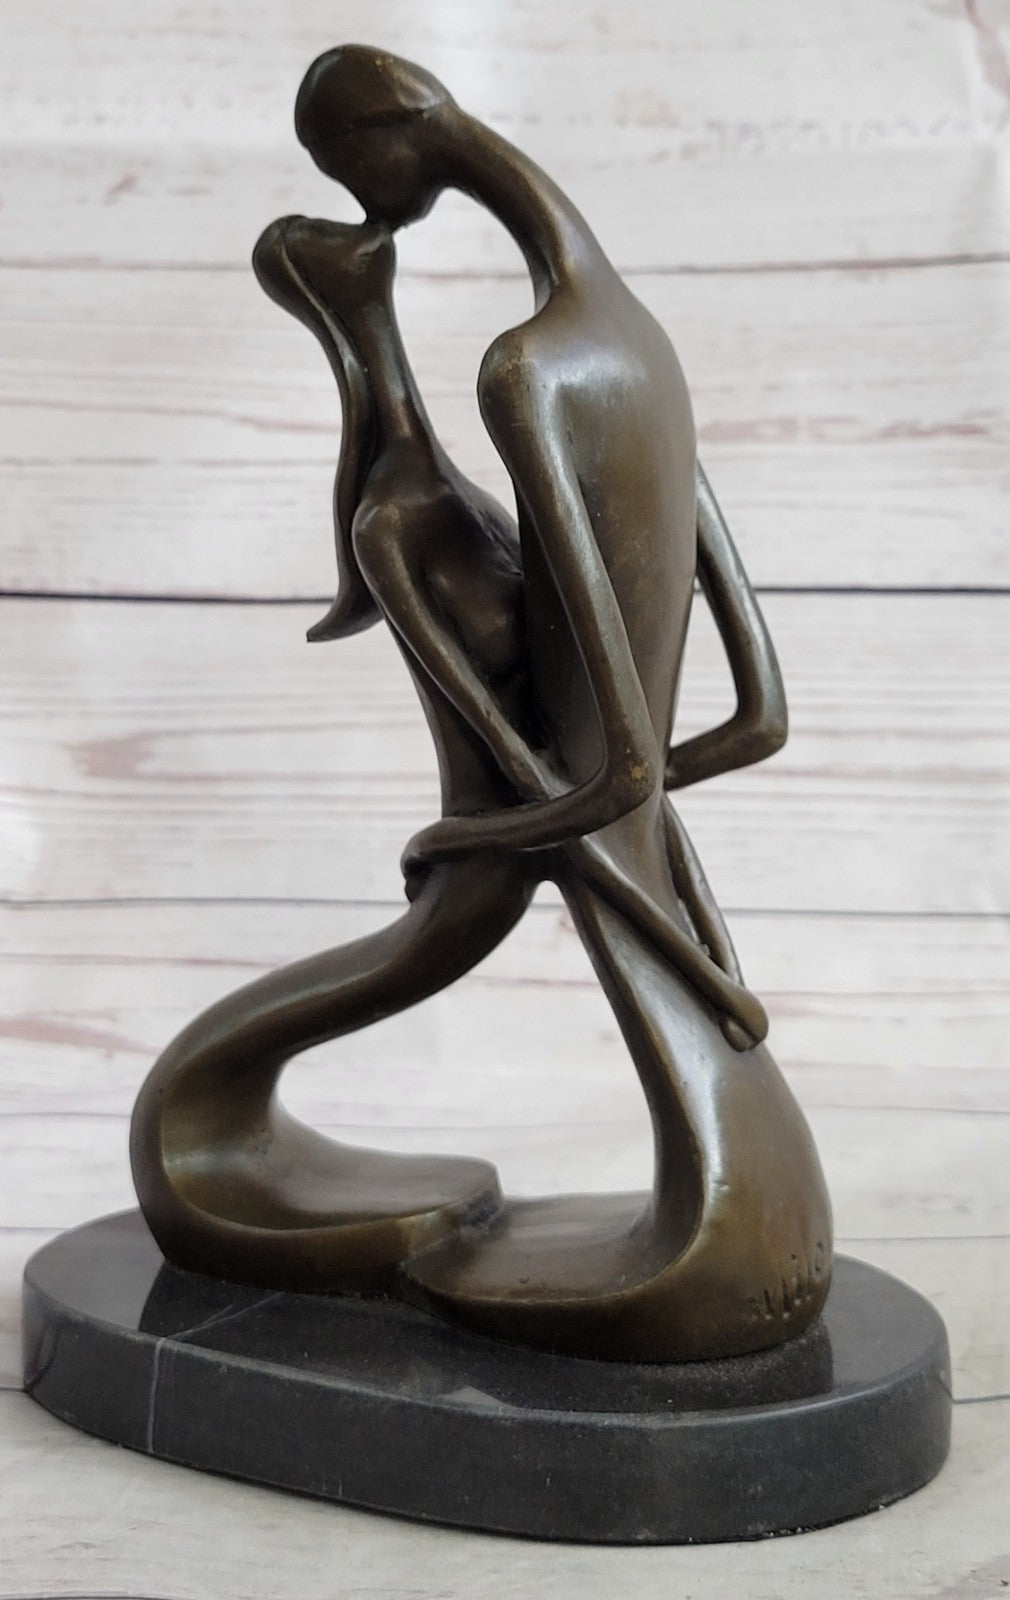 100% Real Bronze Sculpture Nude Lovers Couple Erotic Sexy Art Deco Abstract SALE